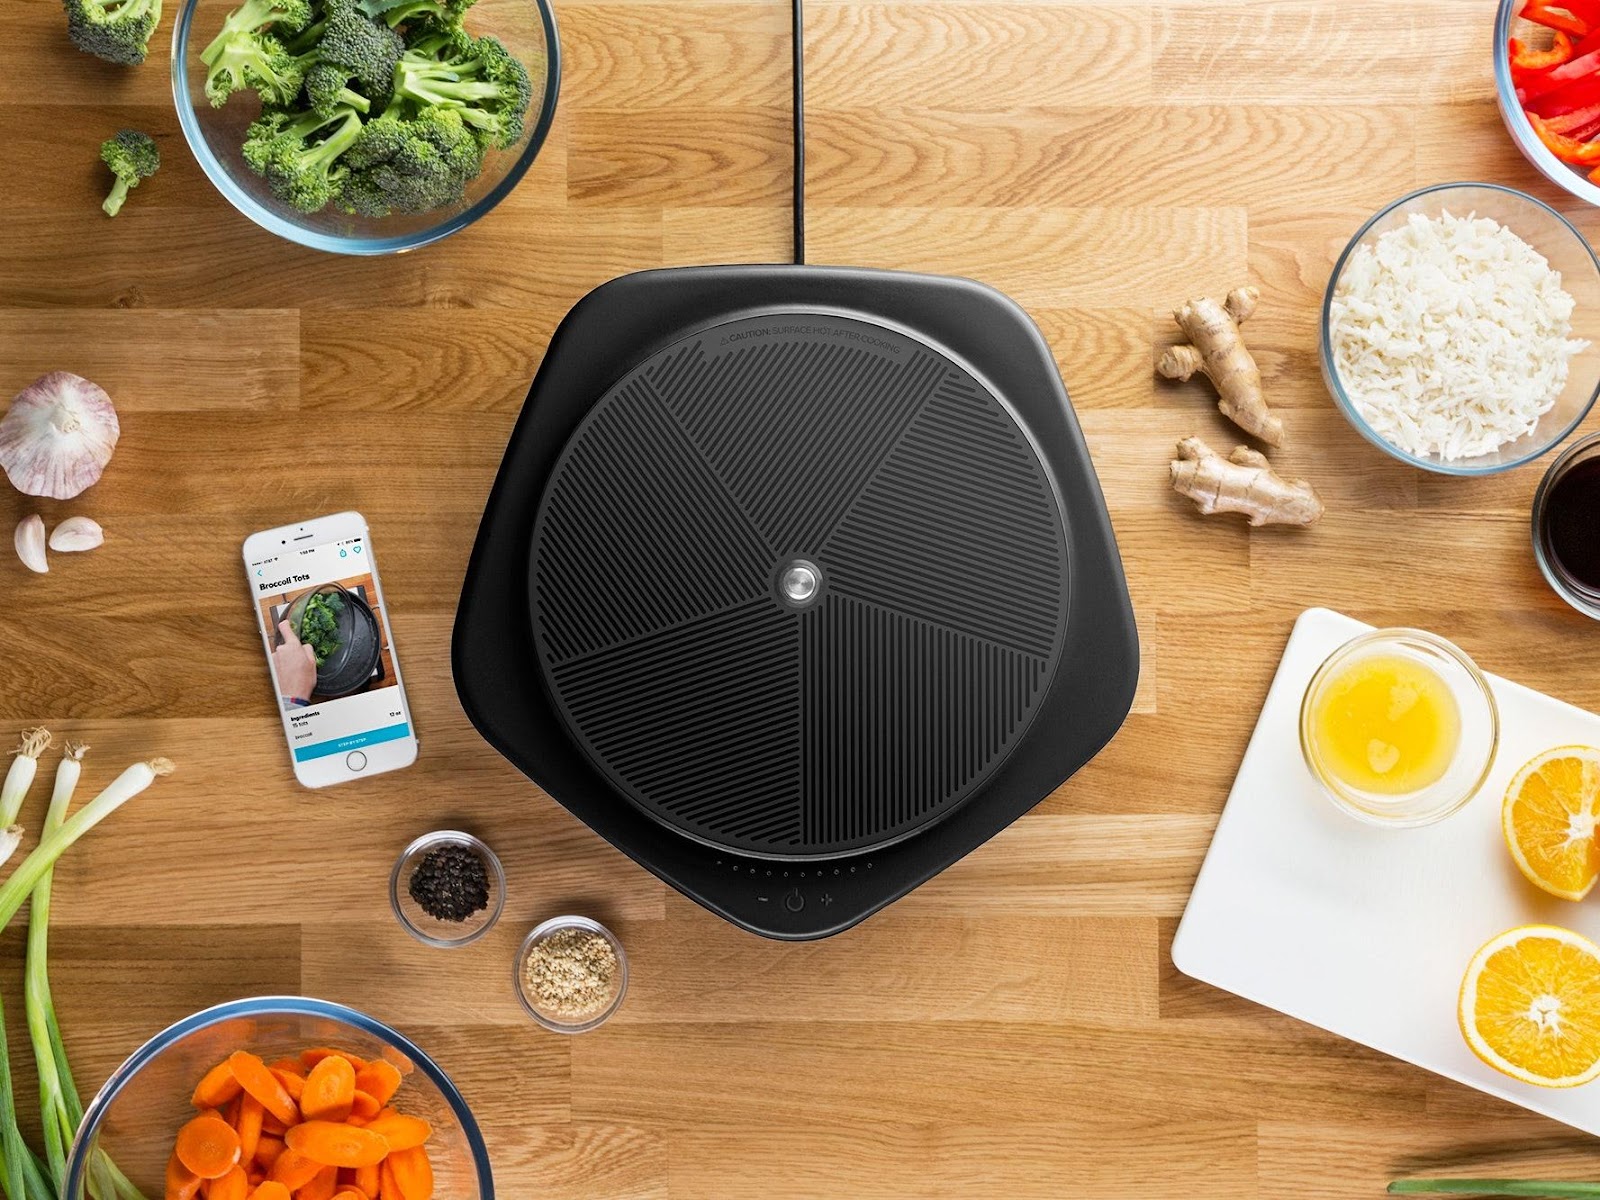 Tasty One Top Review: This Smart Induction Cooktop Is Just Getting Warmed  Up | WIRED